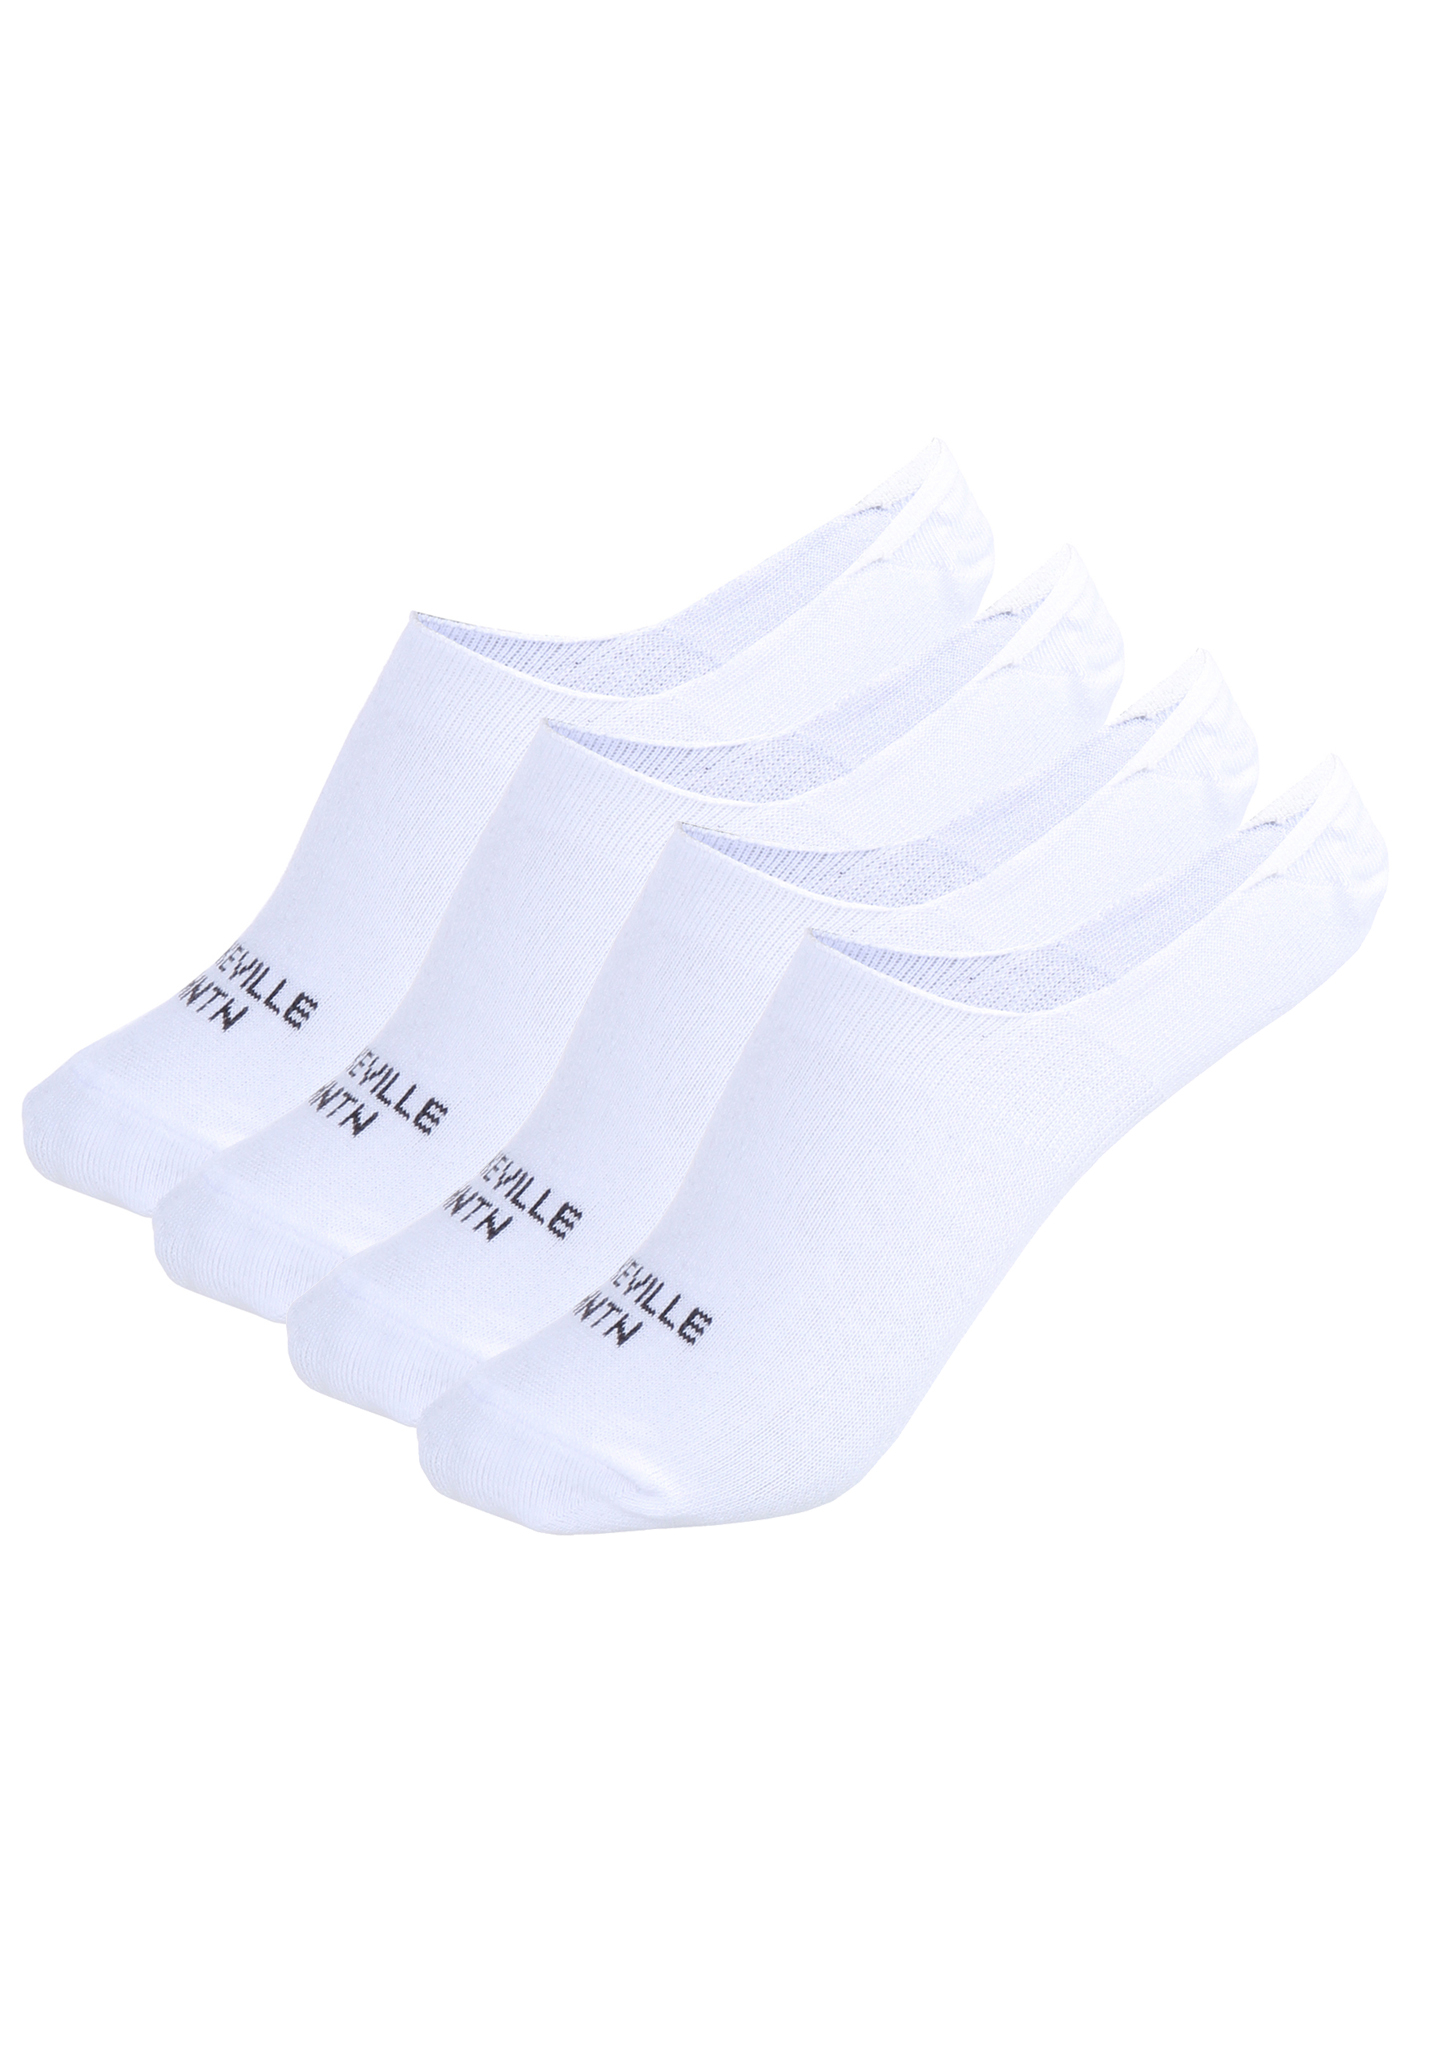 Lakeville Mountain GO Sneakersocks invisible 2pack Marken weiß 47-50